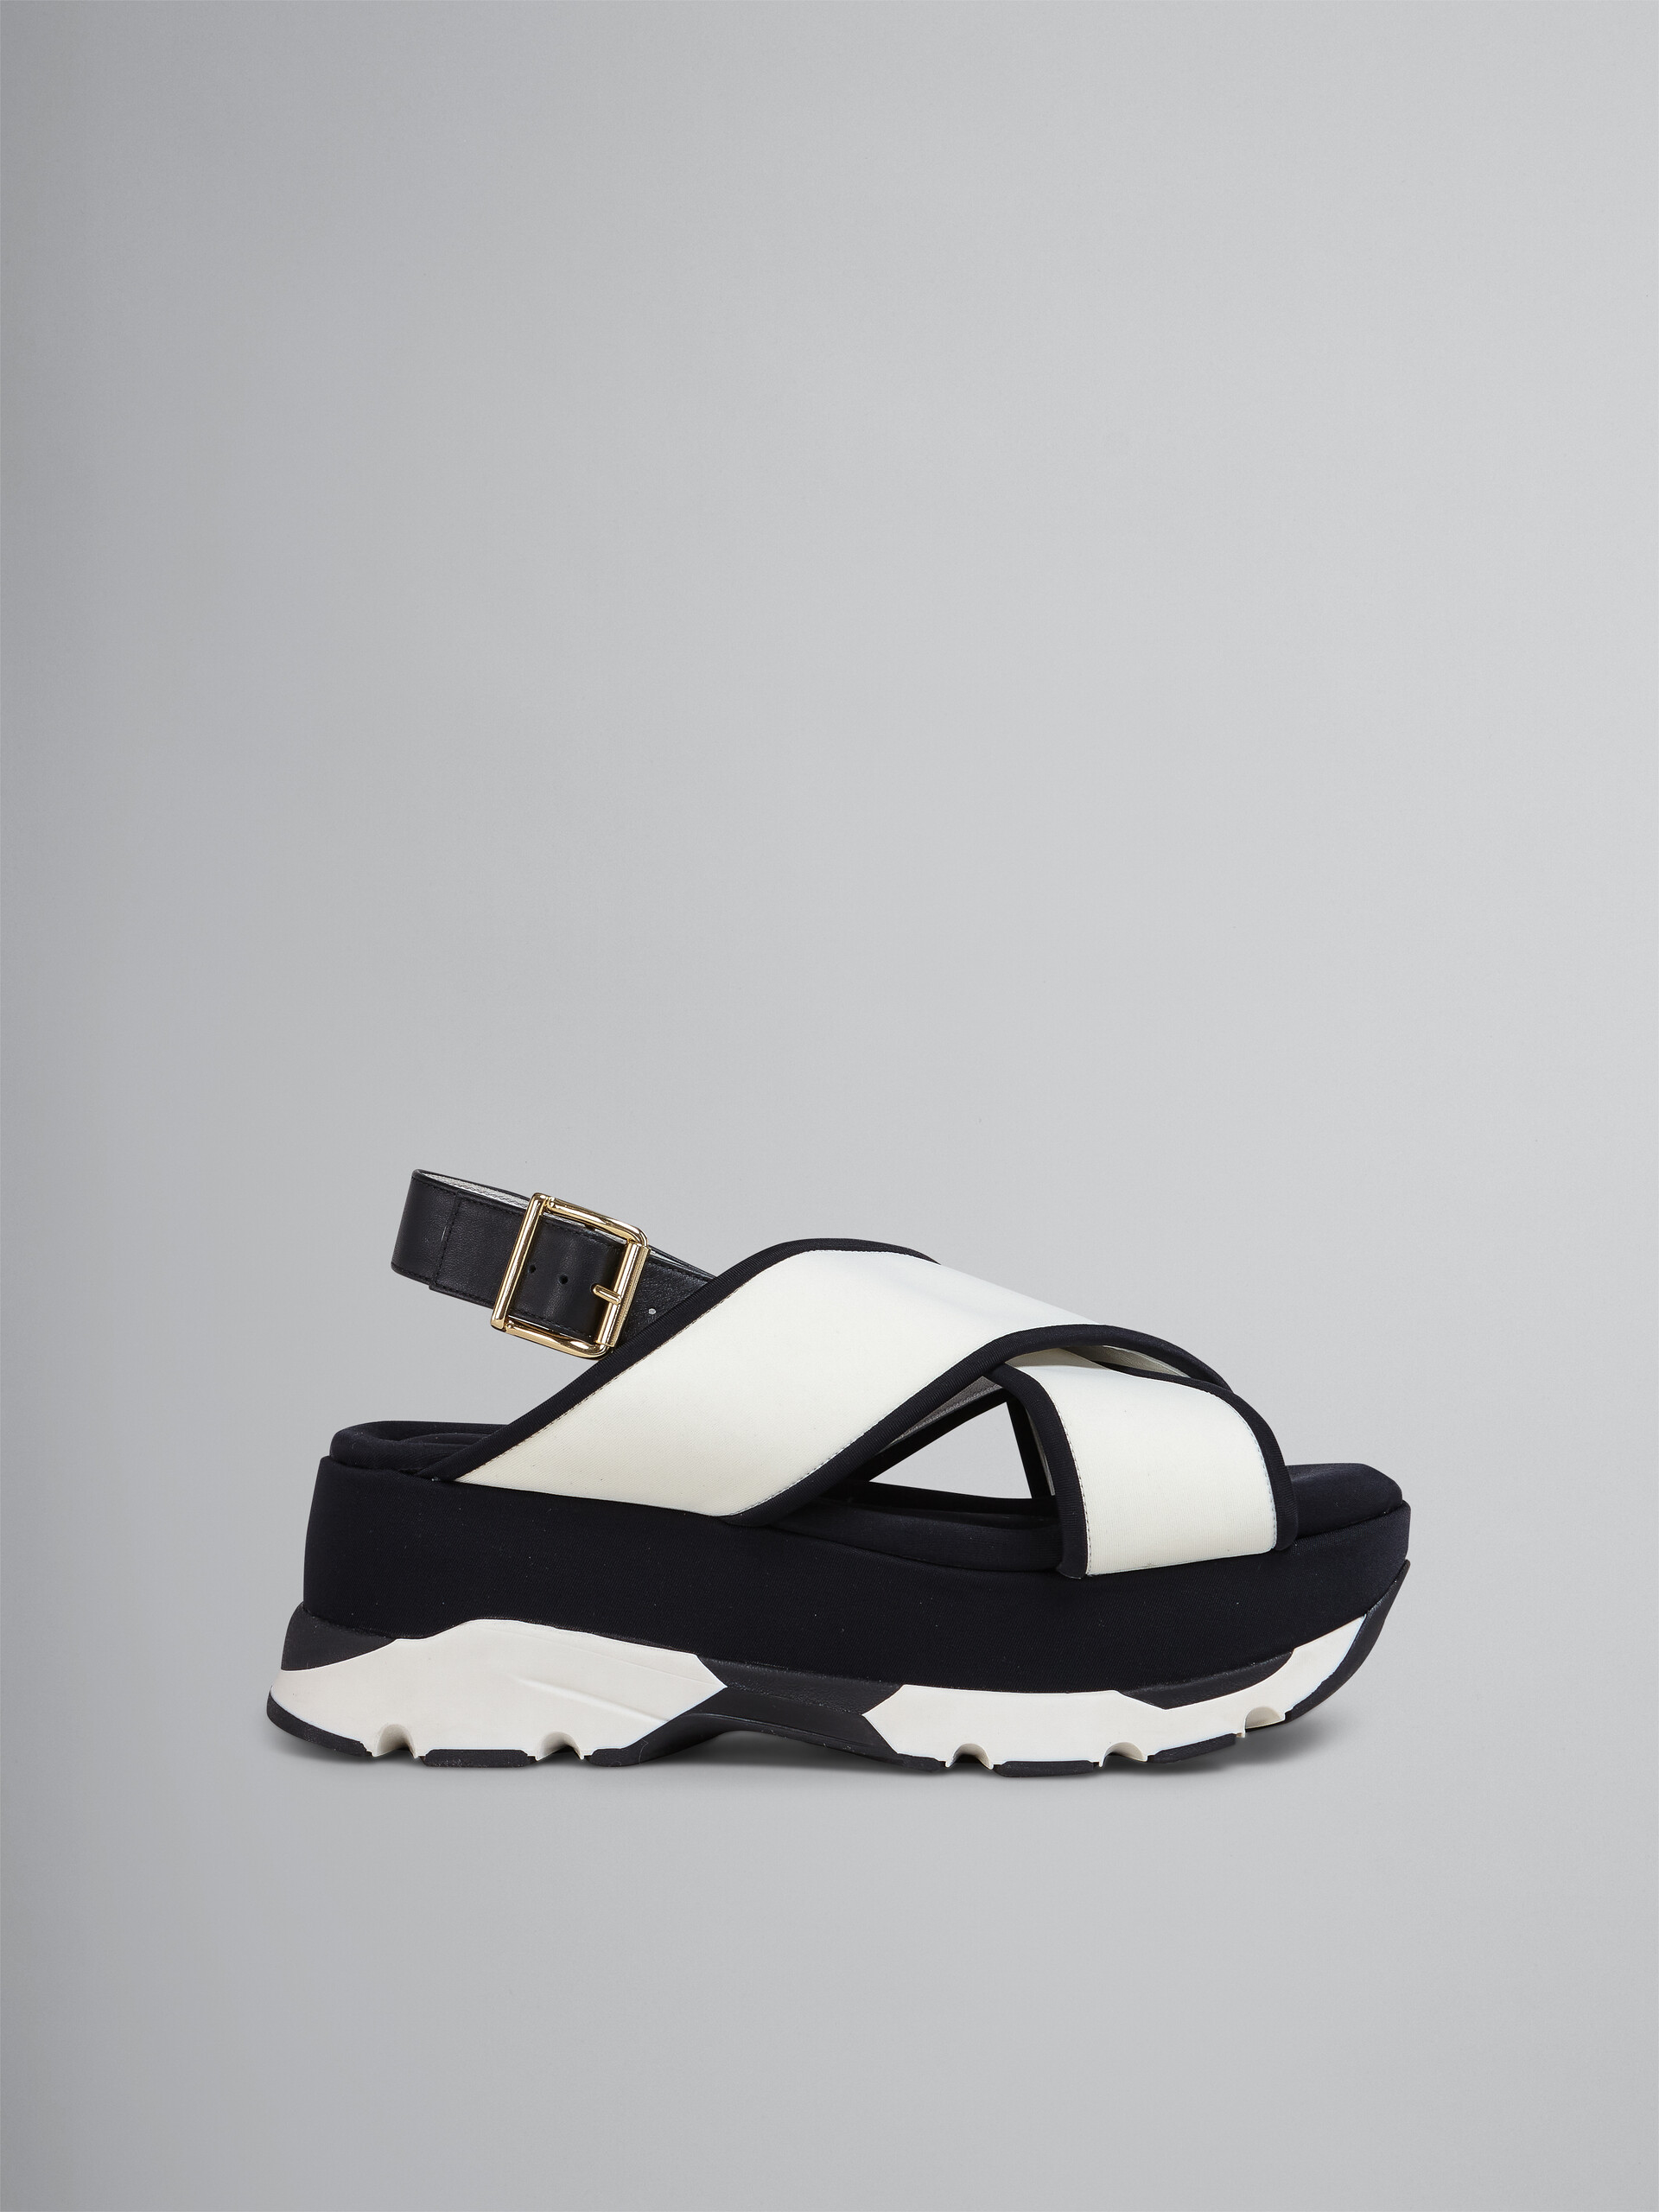 White and black technical fabric wedge sandal - Sandals - Image 1